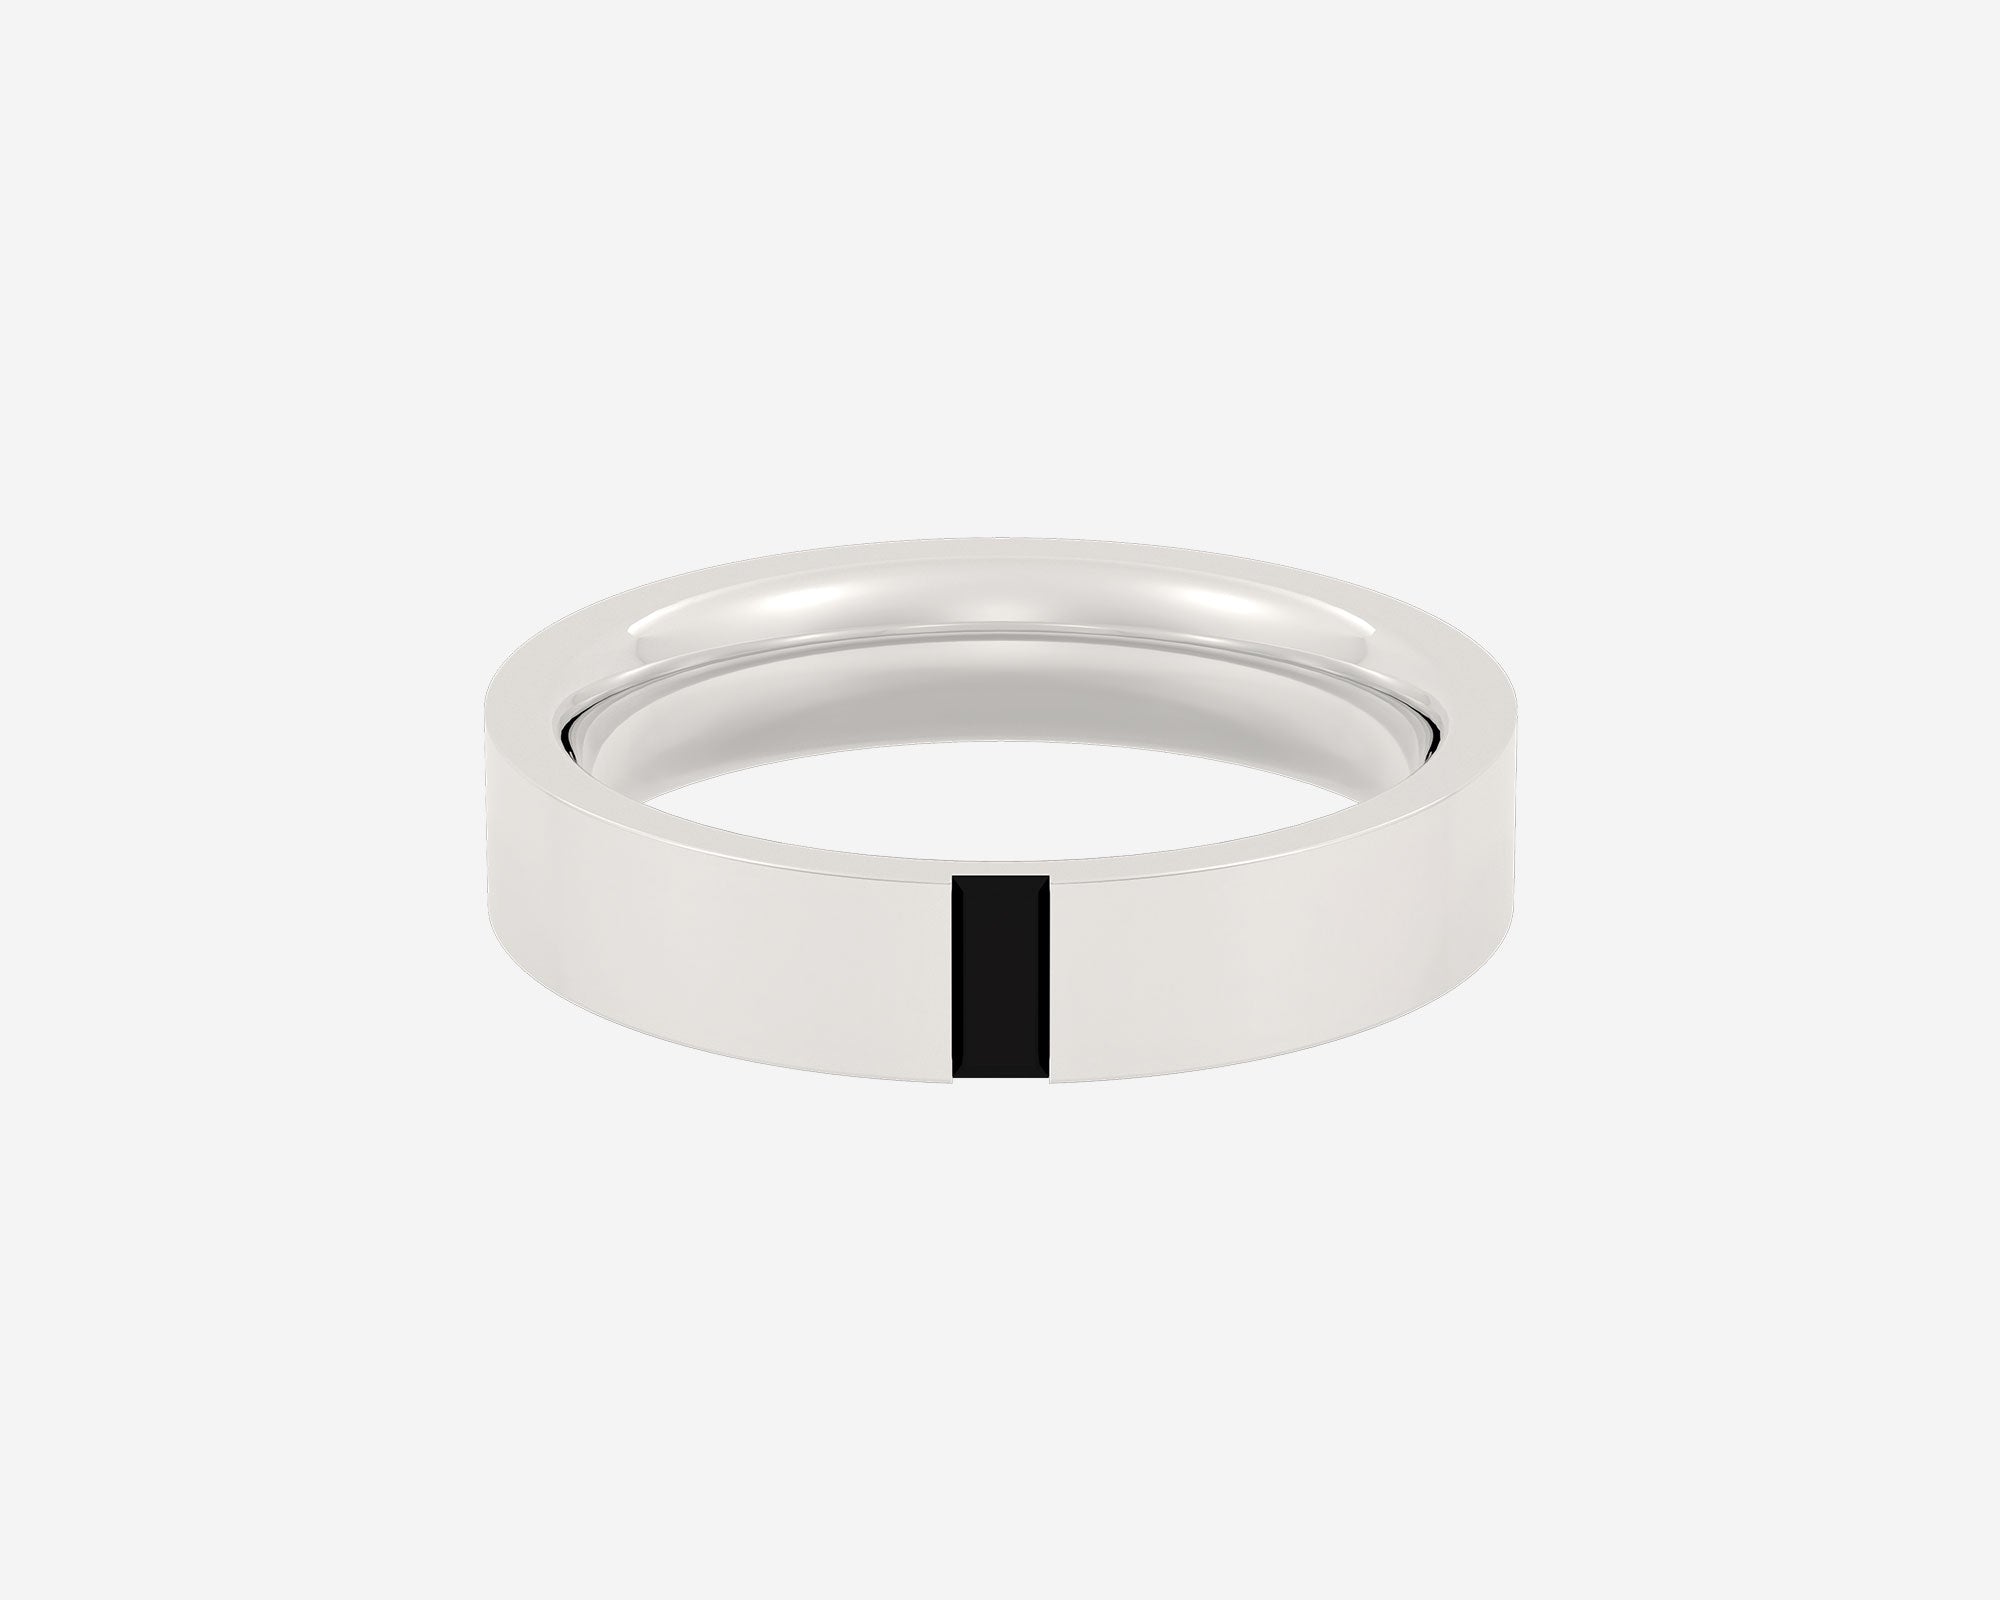 The Flush Baguette ring by Holden in white gold with a black gemstone